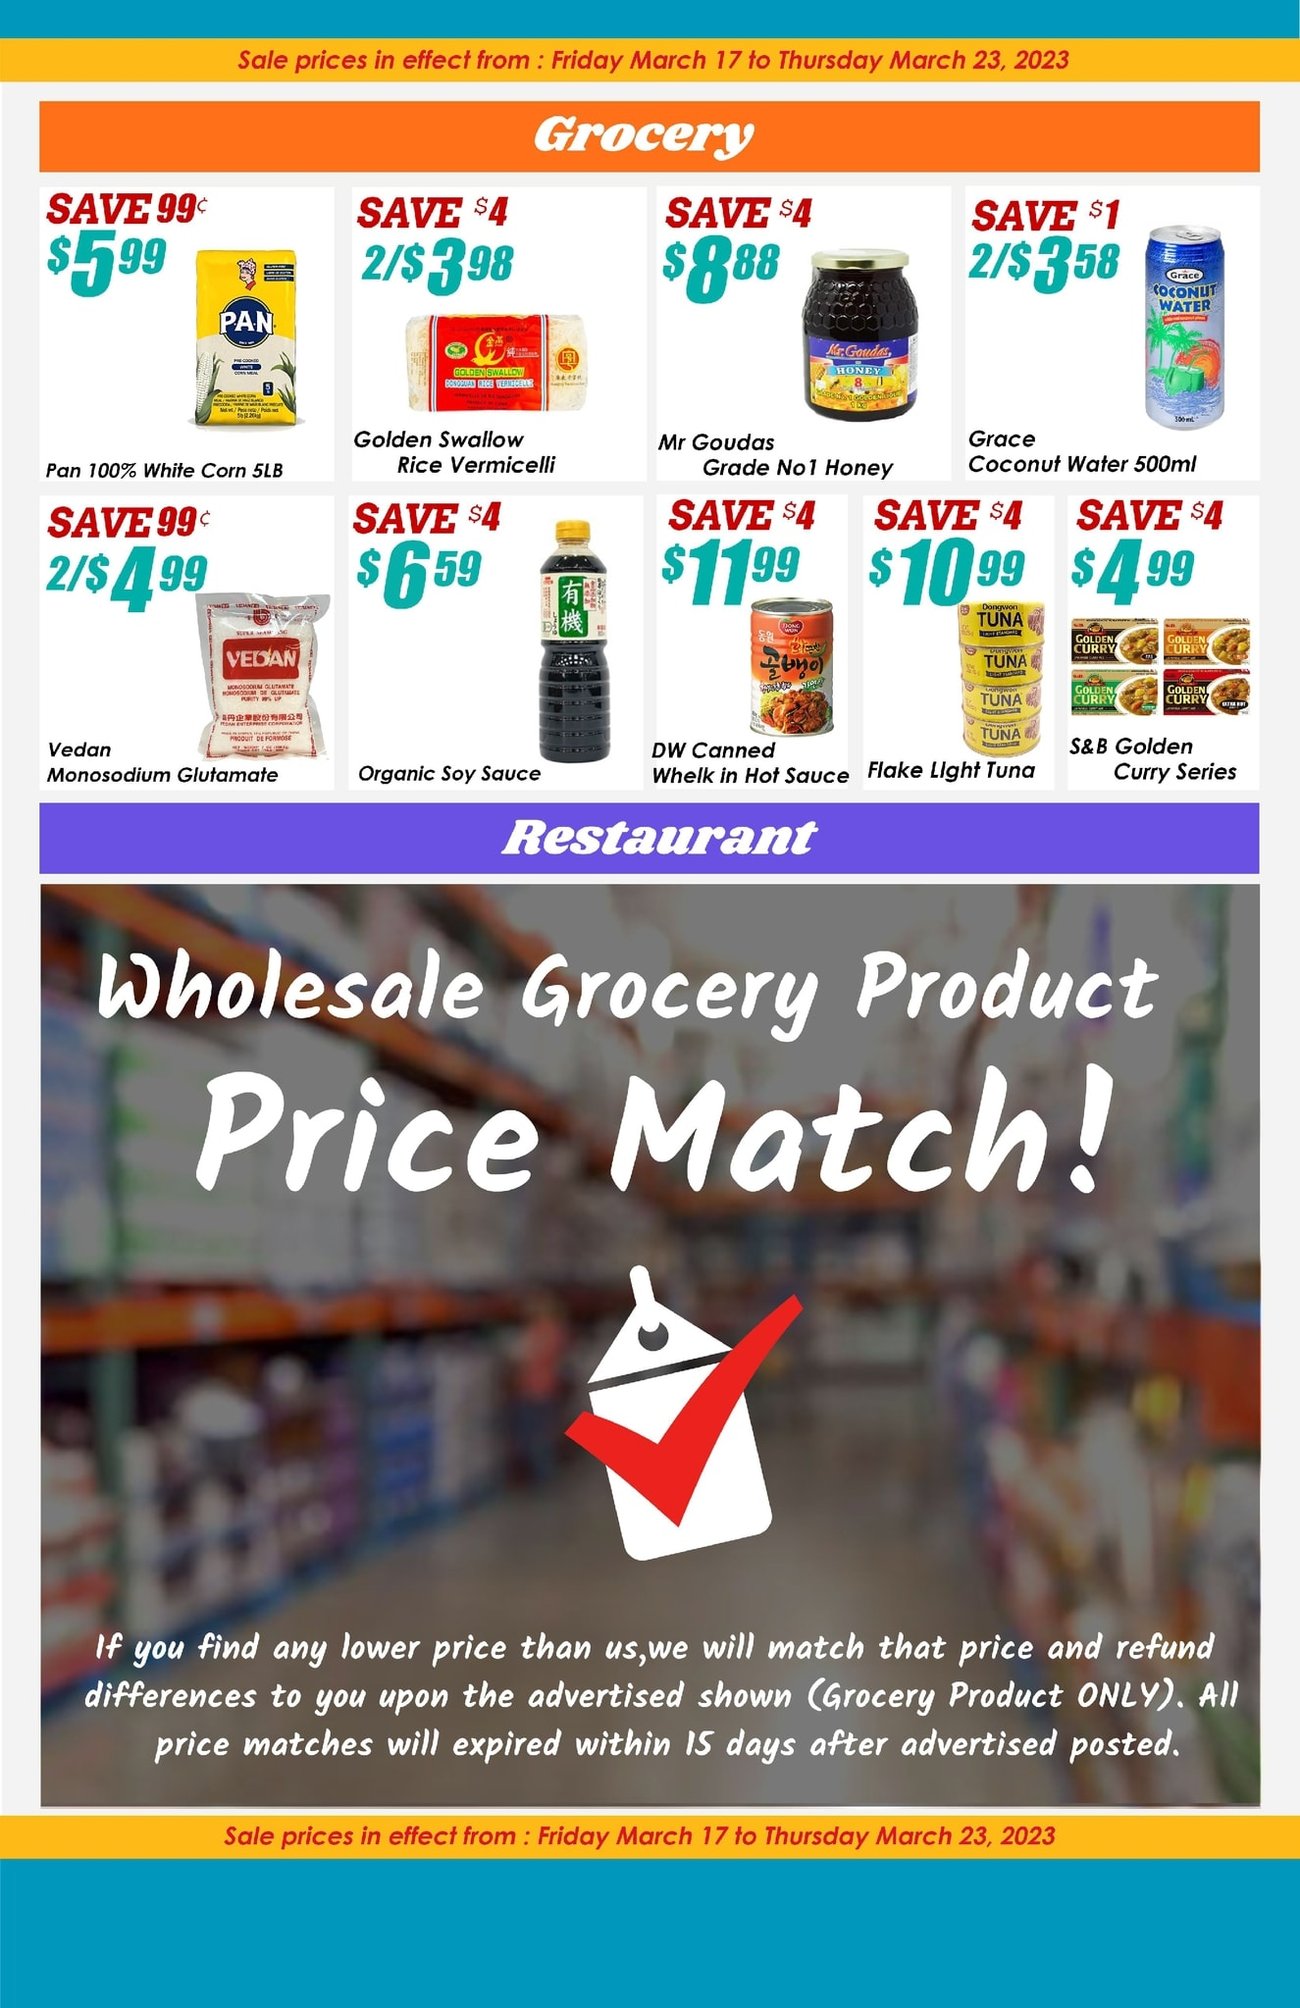 United Supermarket - Weekly Flyer Specials - Page 2